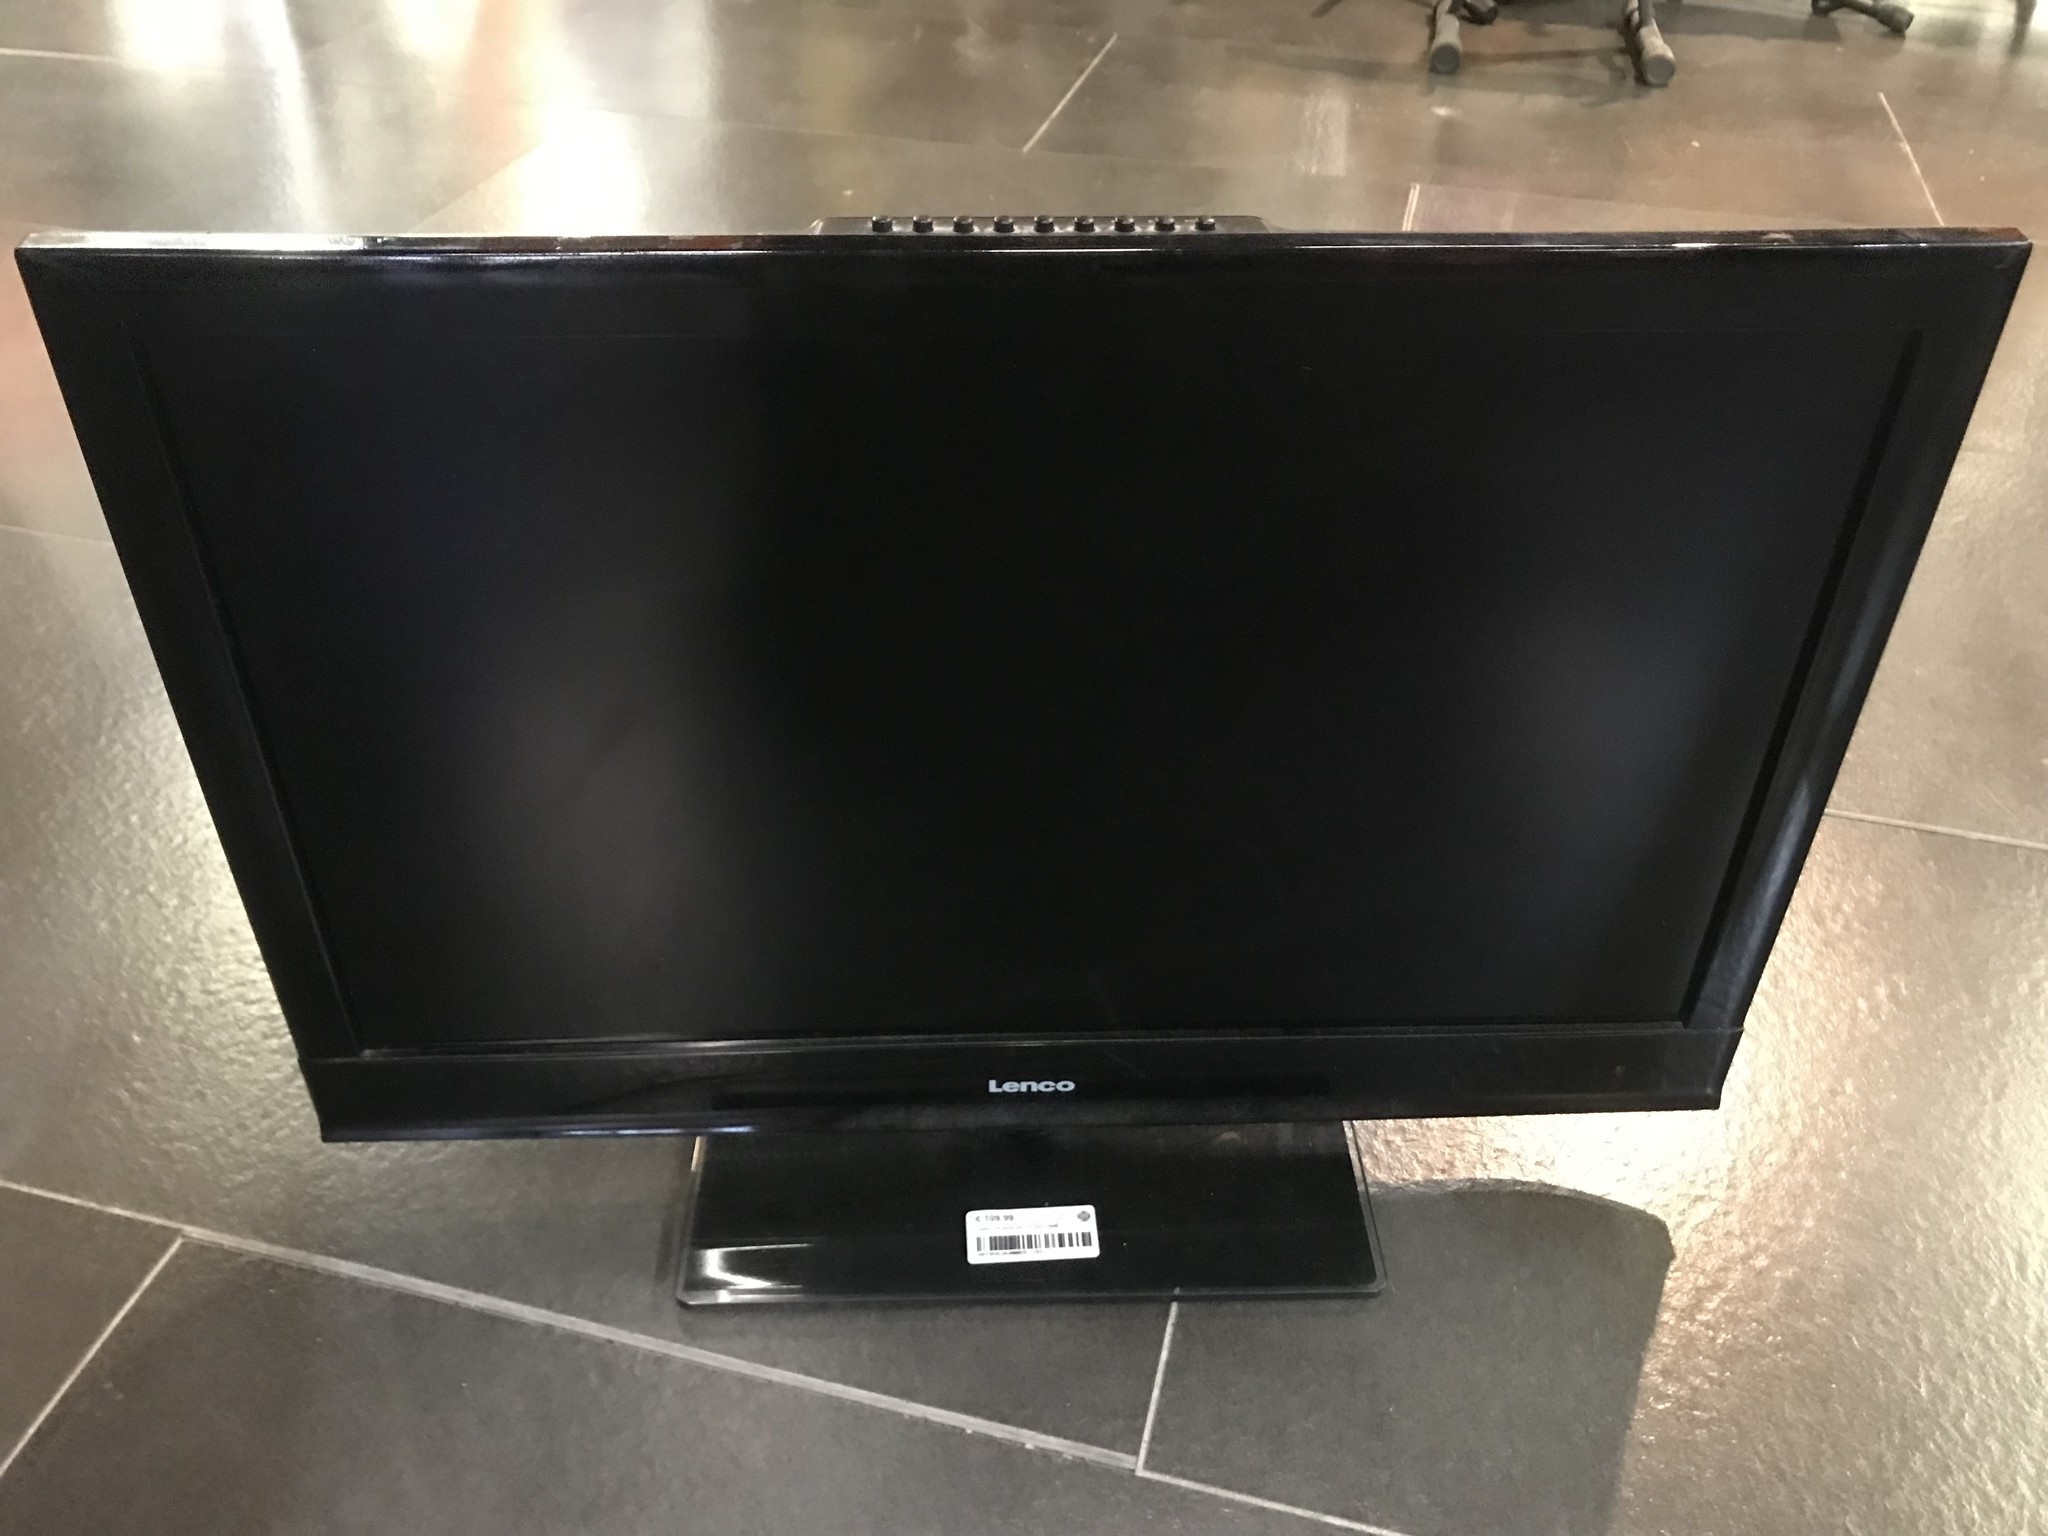 Pastoor Pluche pop Stationair Lenco 24 Inch HD TV DVL 2440 || In nette staat || - Used Products Rotterdam  Zuid